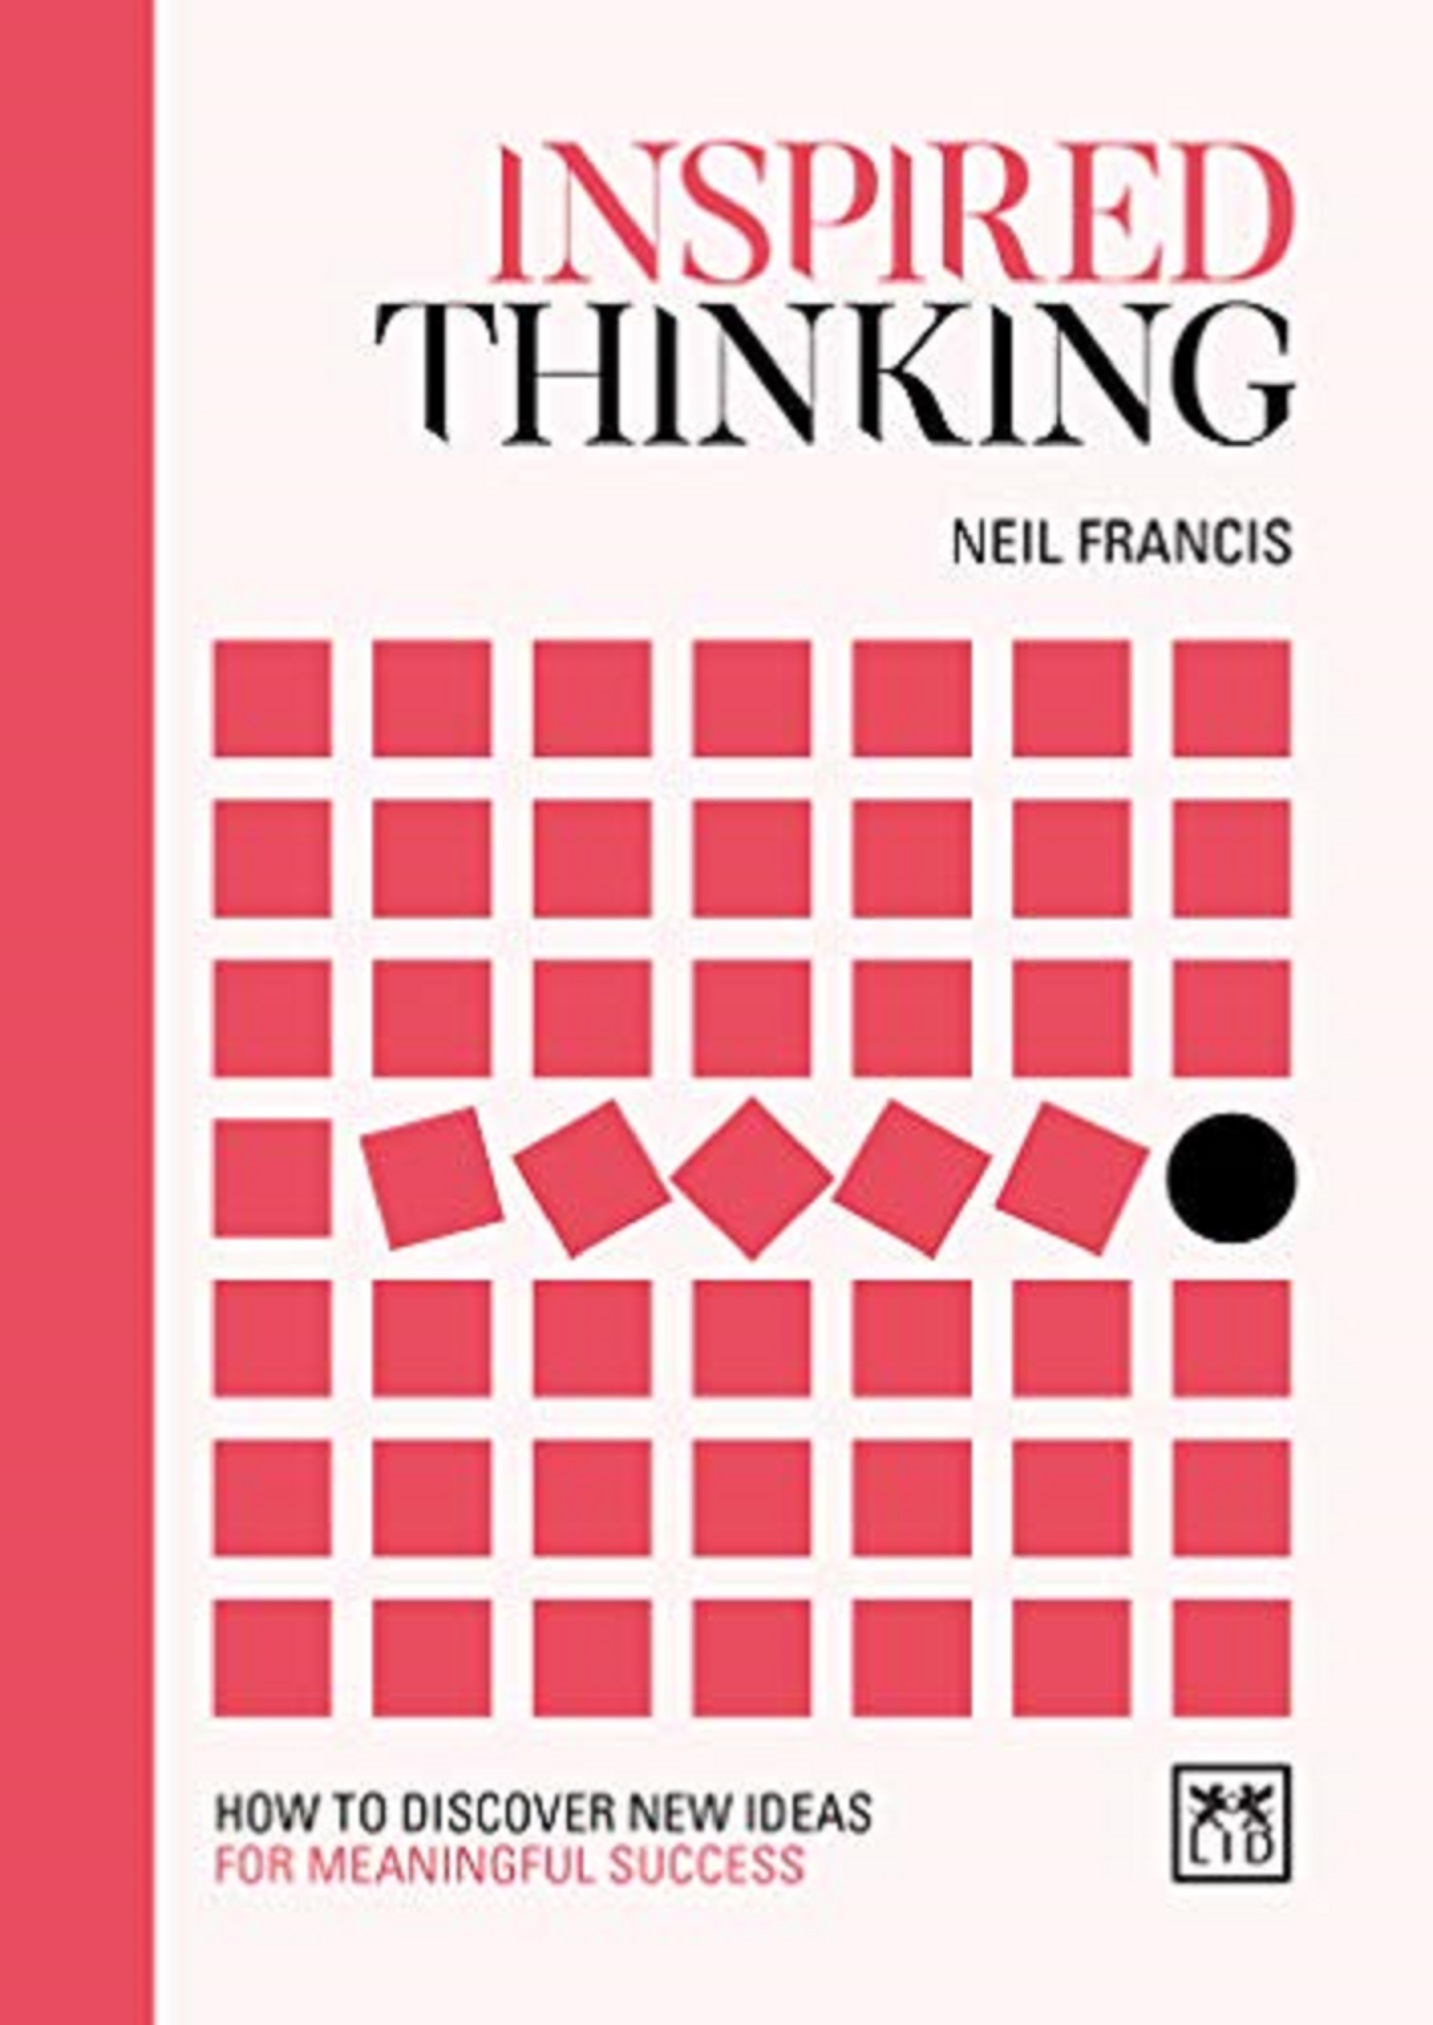 Inspired Thinking | Neil Francis